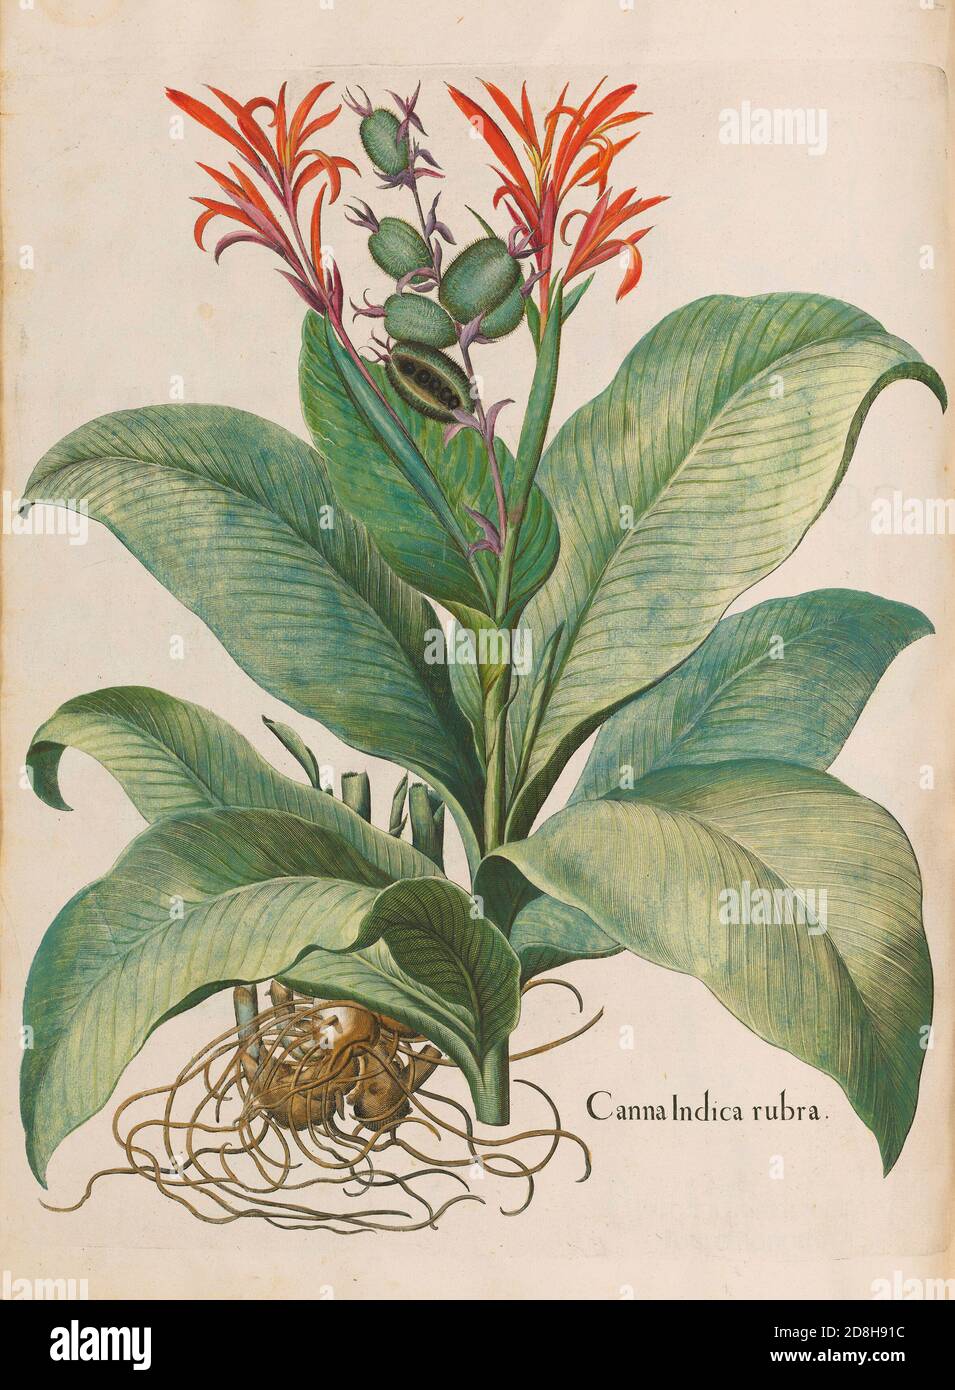 Canna Indica rubra, botanical illustration by Basil Besler from the The Hortus Eystettensis, a codex produced by Basilius Besler in 1613. Stock Photo